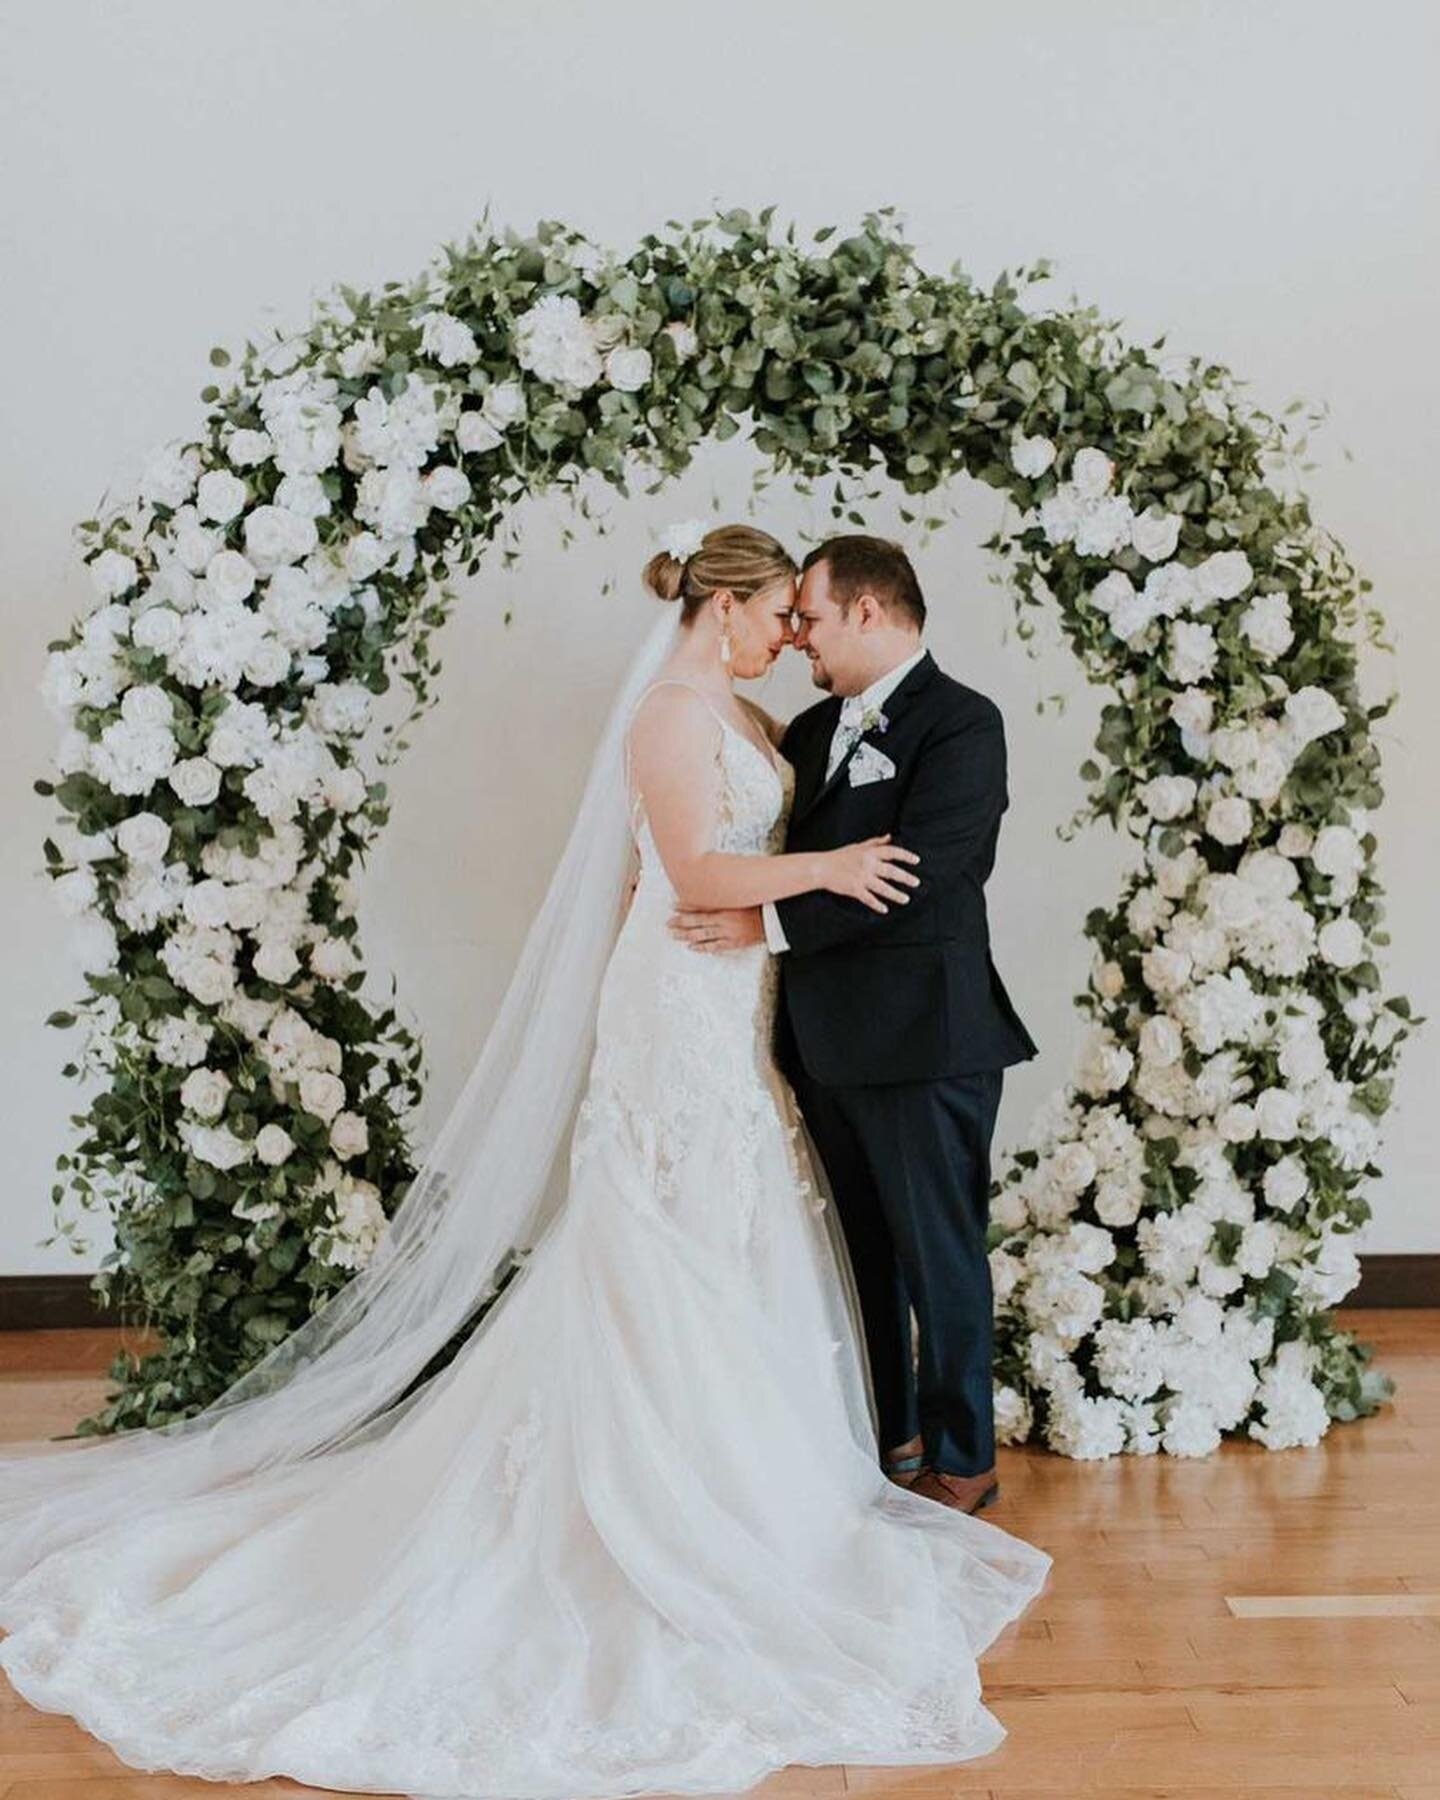 Train Tuesday!  That train, those flowers, the way they look at each other... this one has it all.⁠
⁠
⁠
📷 @sammiwhyrock⁠
#alterations #wedding #weddinggown #bride #beautifulbride #weddingdress #bridalgown #bridal #somethingwonderful #indybride #indi